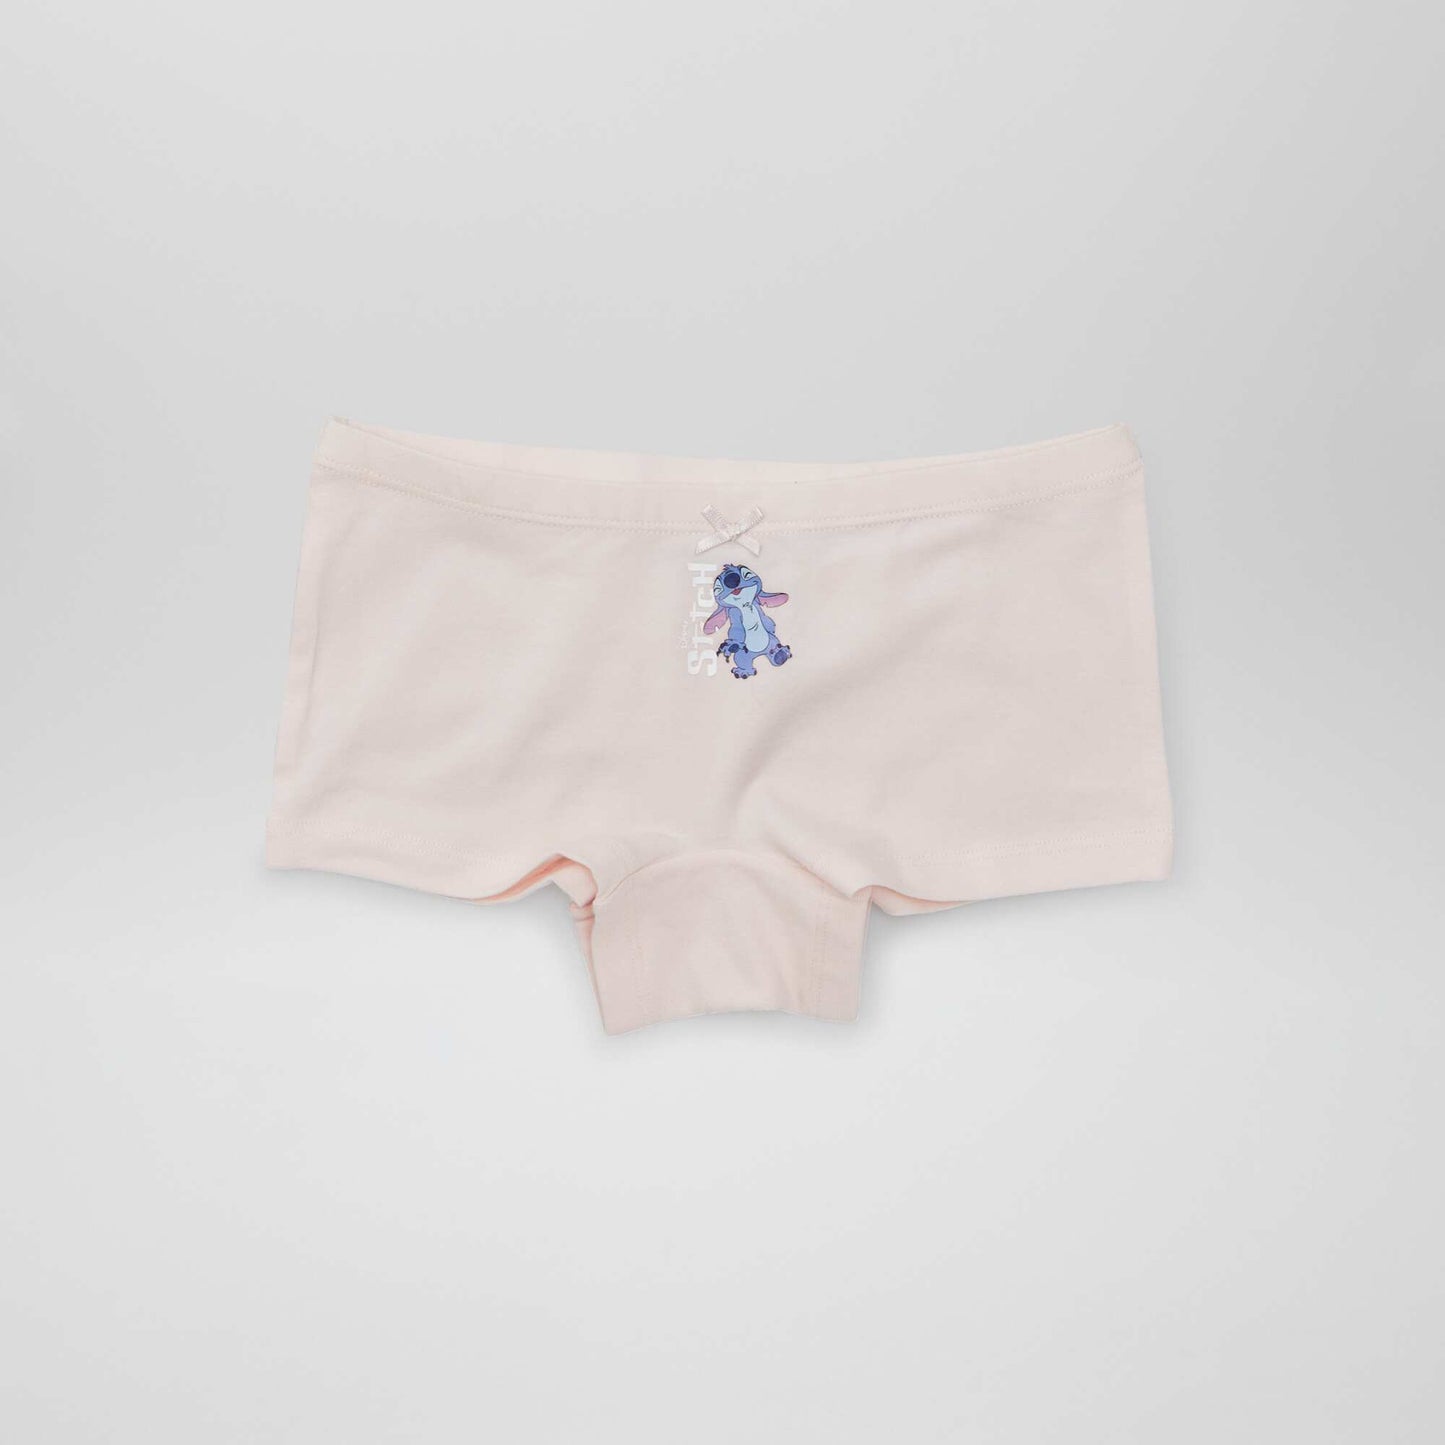 Pack of 3 pairs of 'Disney' 'Stitch' boy shorts PINK